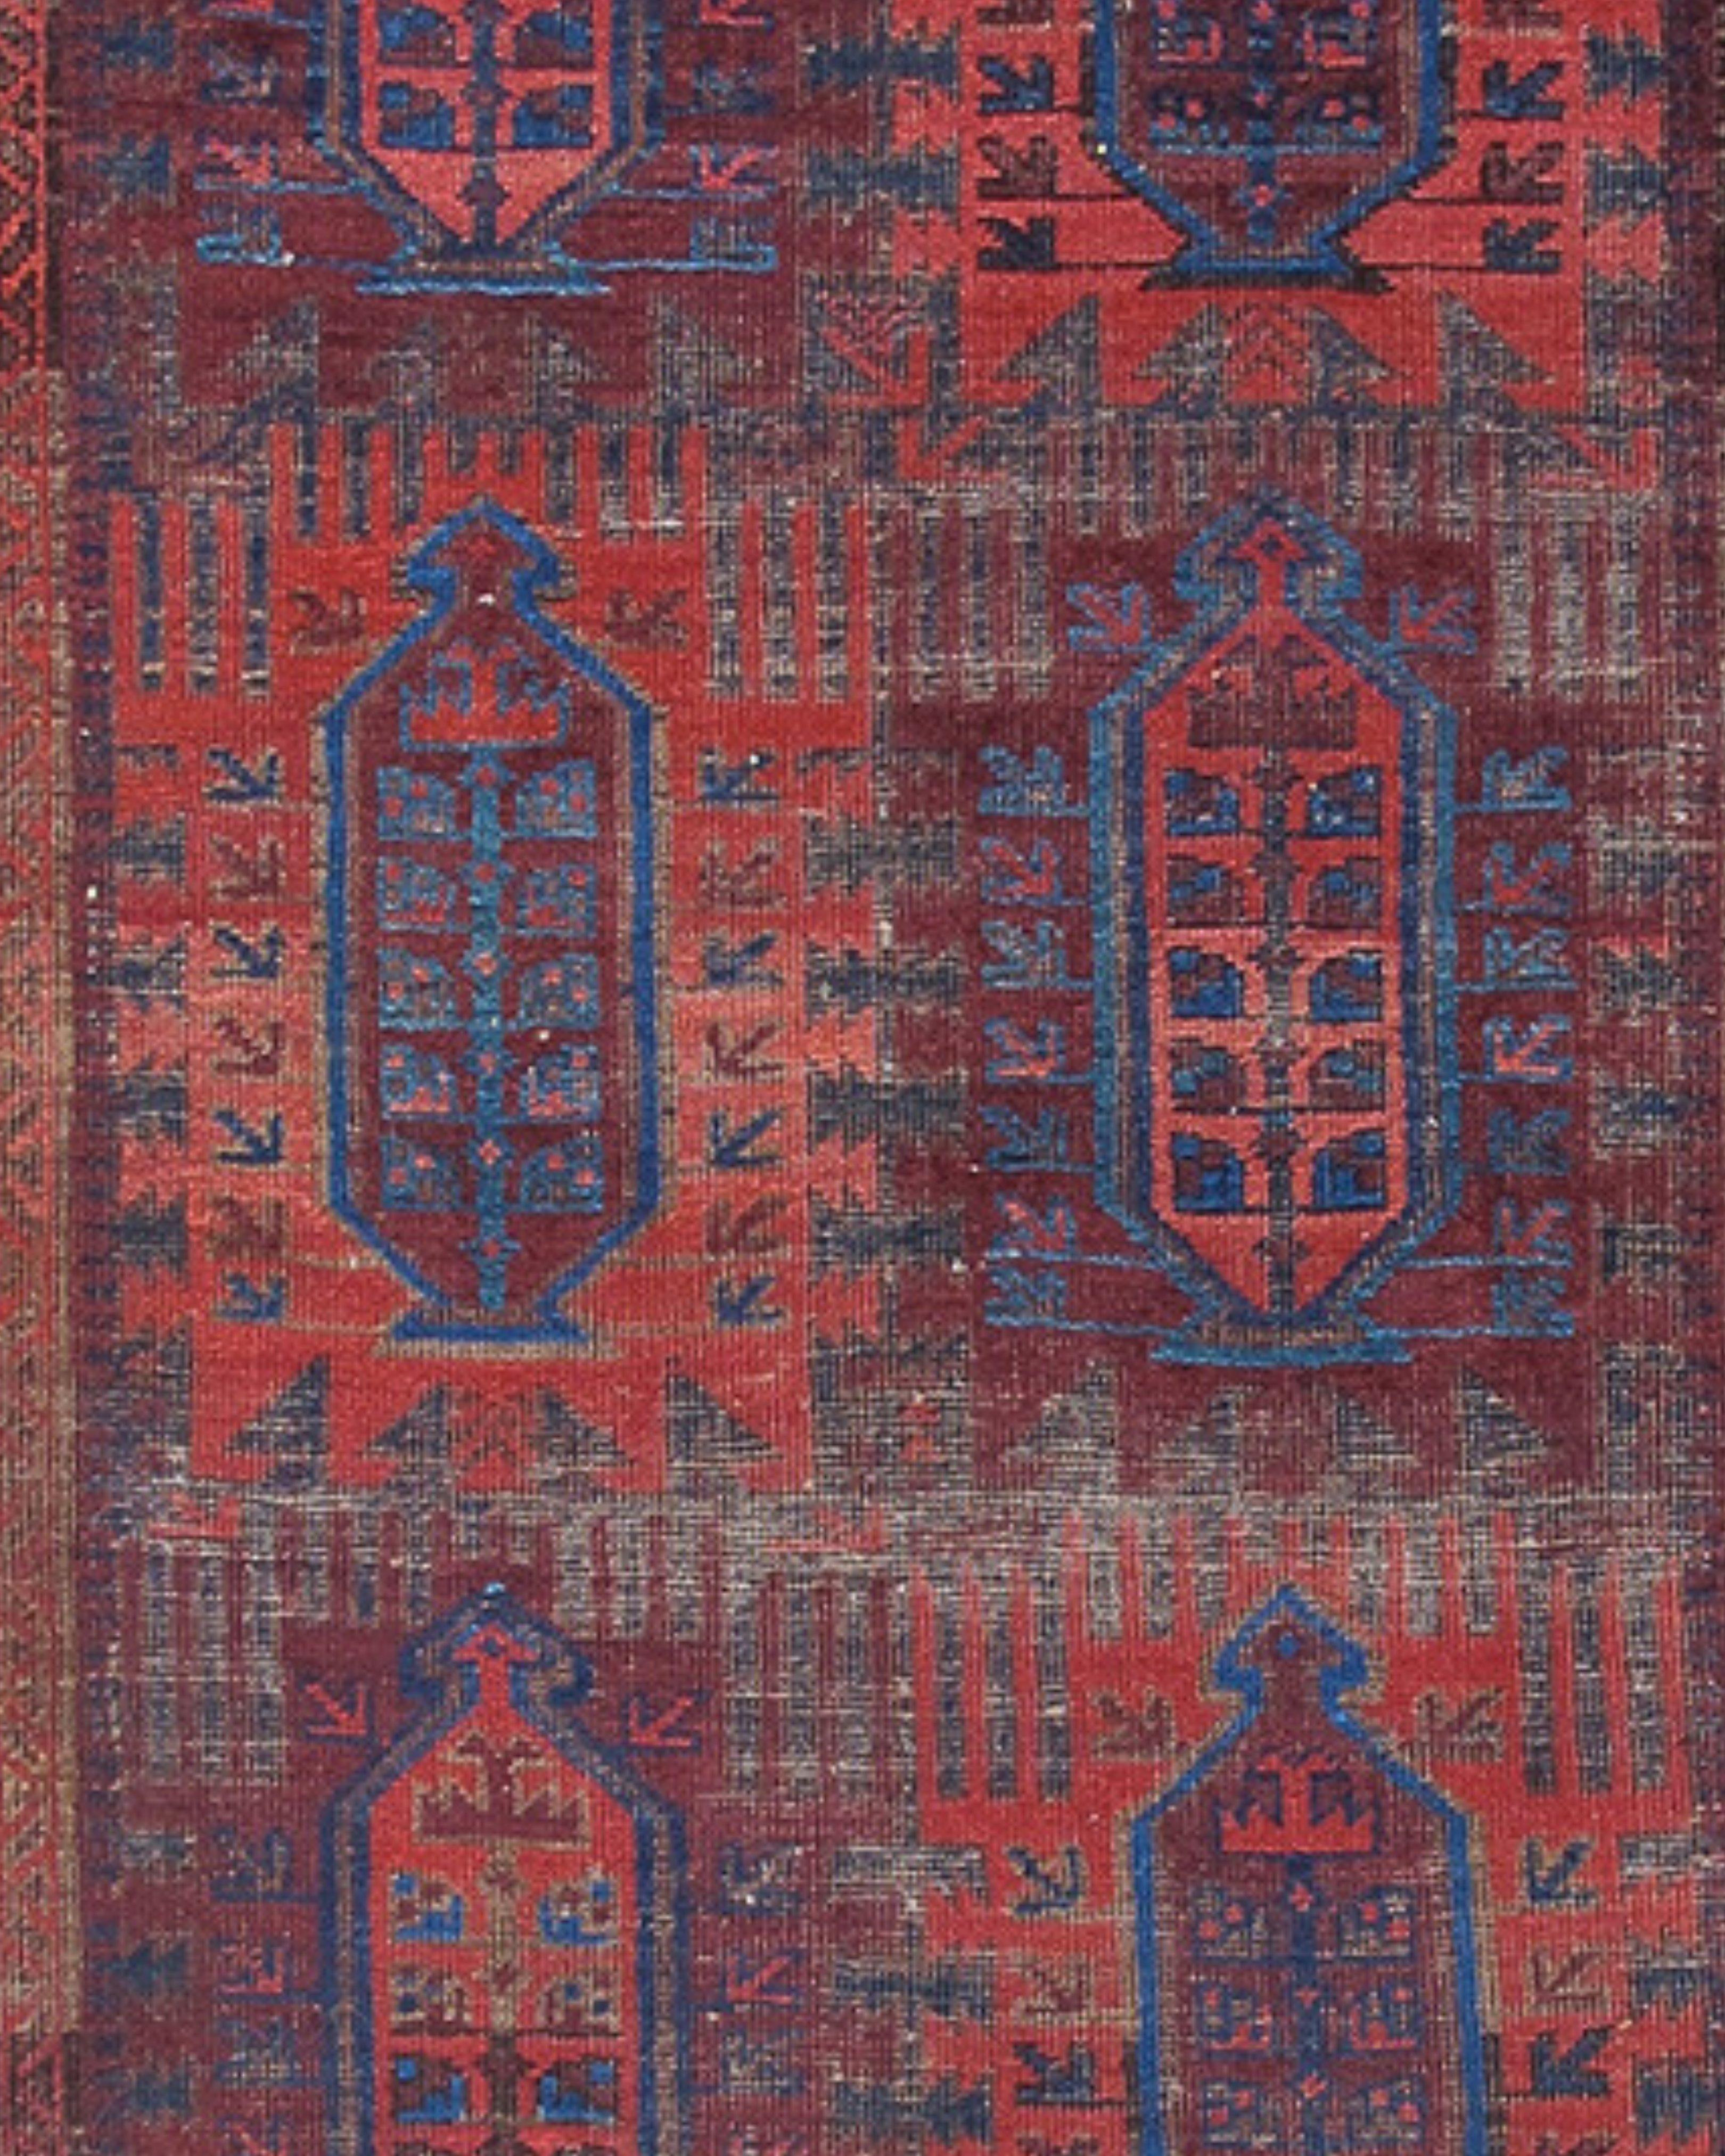 Antique Persian Baluch Rug, Late 19th Century

Additional information:
Dimensions: 6'3